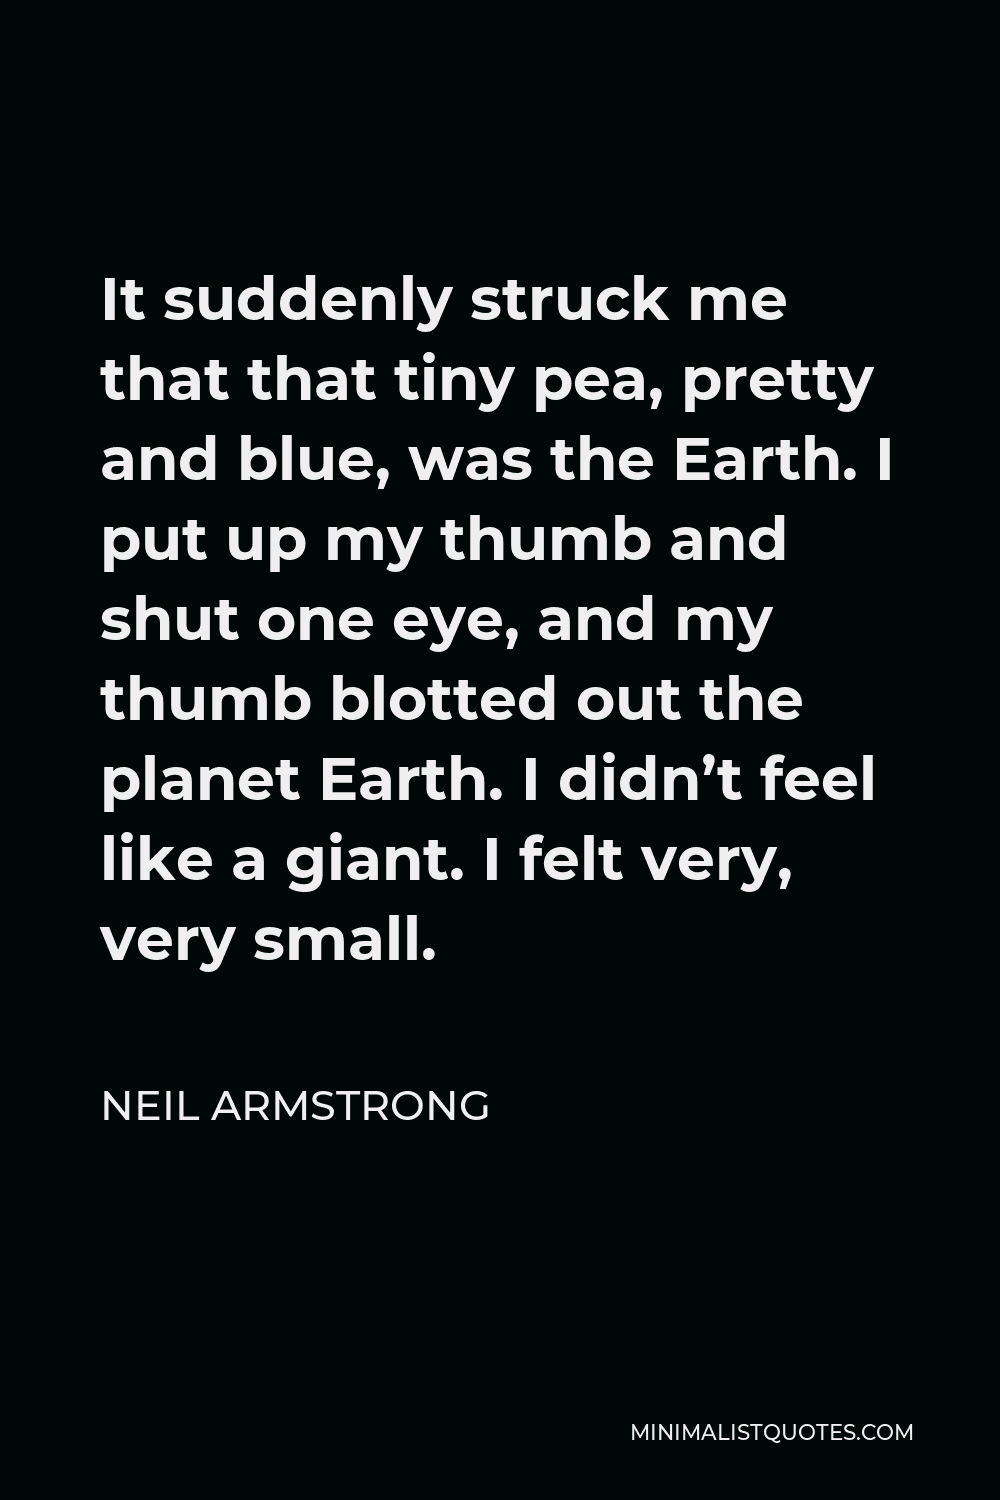 Neil Armstrong Quote - It suddenly struck me that that tiny pea, pretty and blue, was the Earth. I put up my thumb and shut one eye, and my thumb blotted out the planet Earth. I didn’t feel like a giant. I felt very, very small.